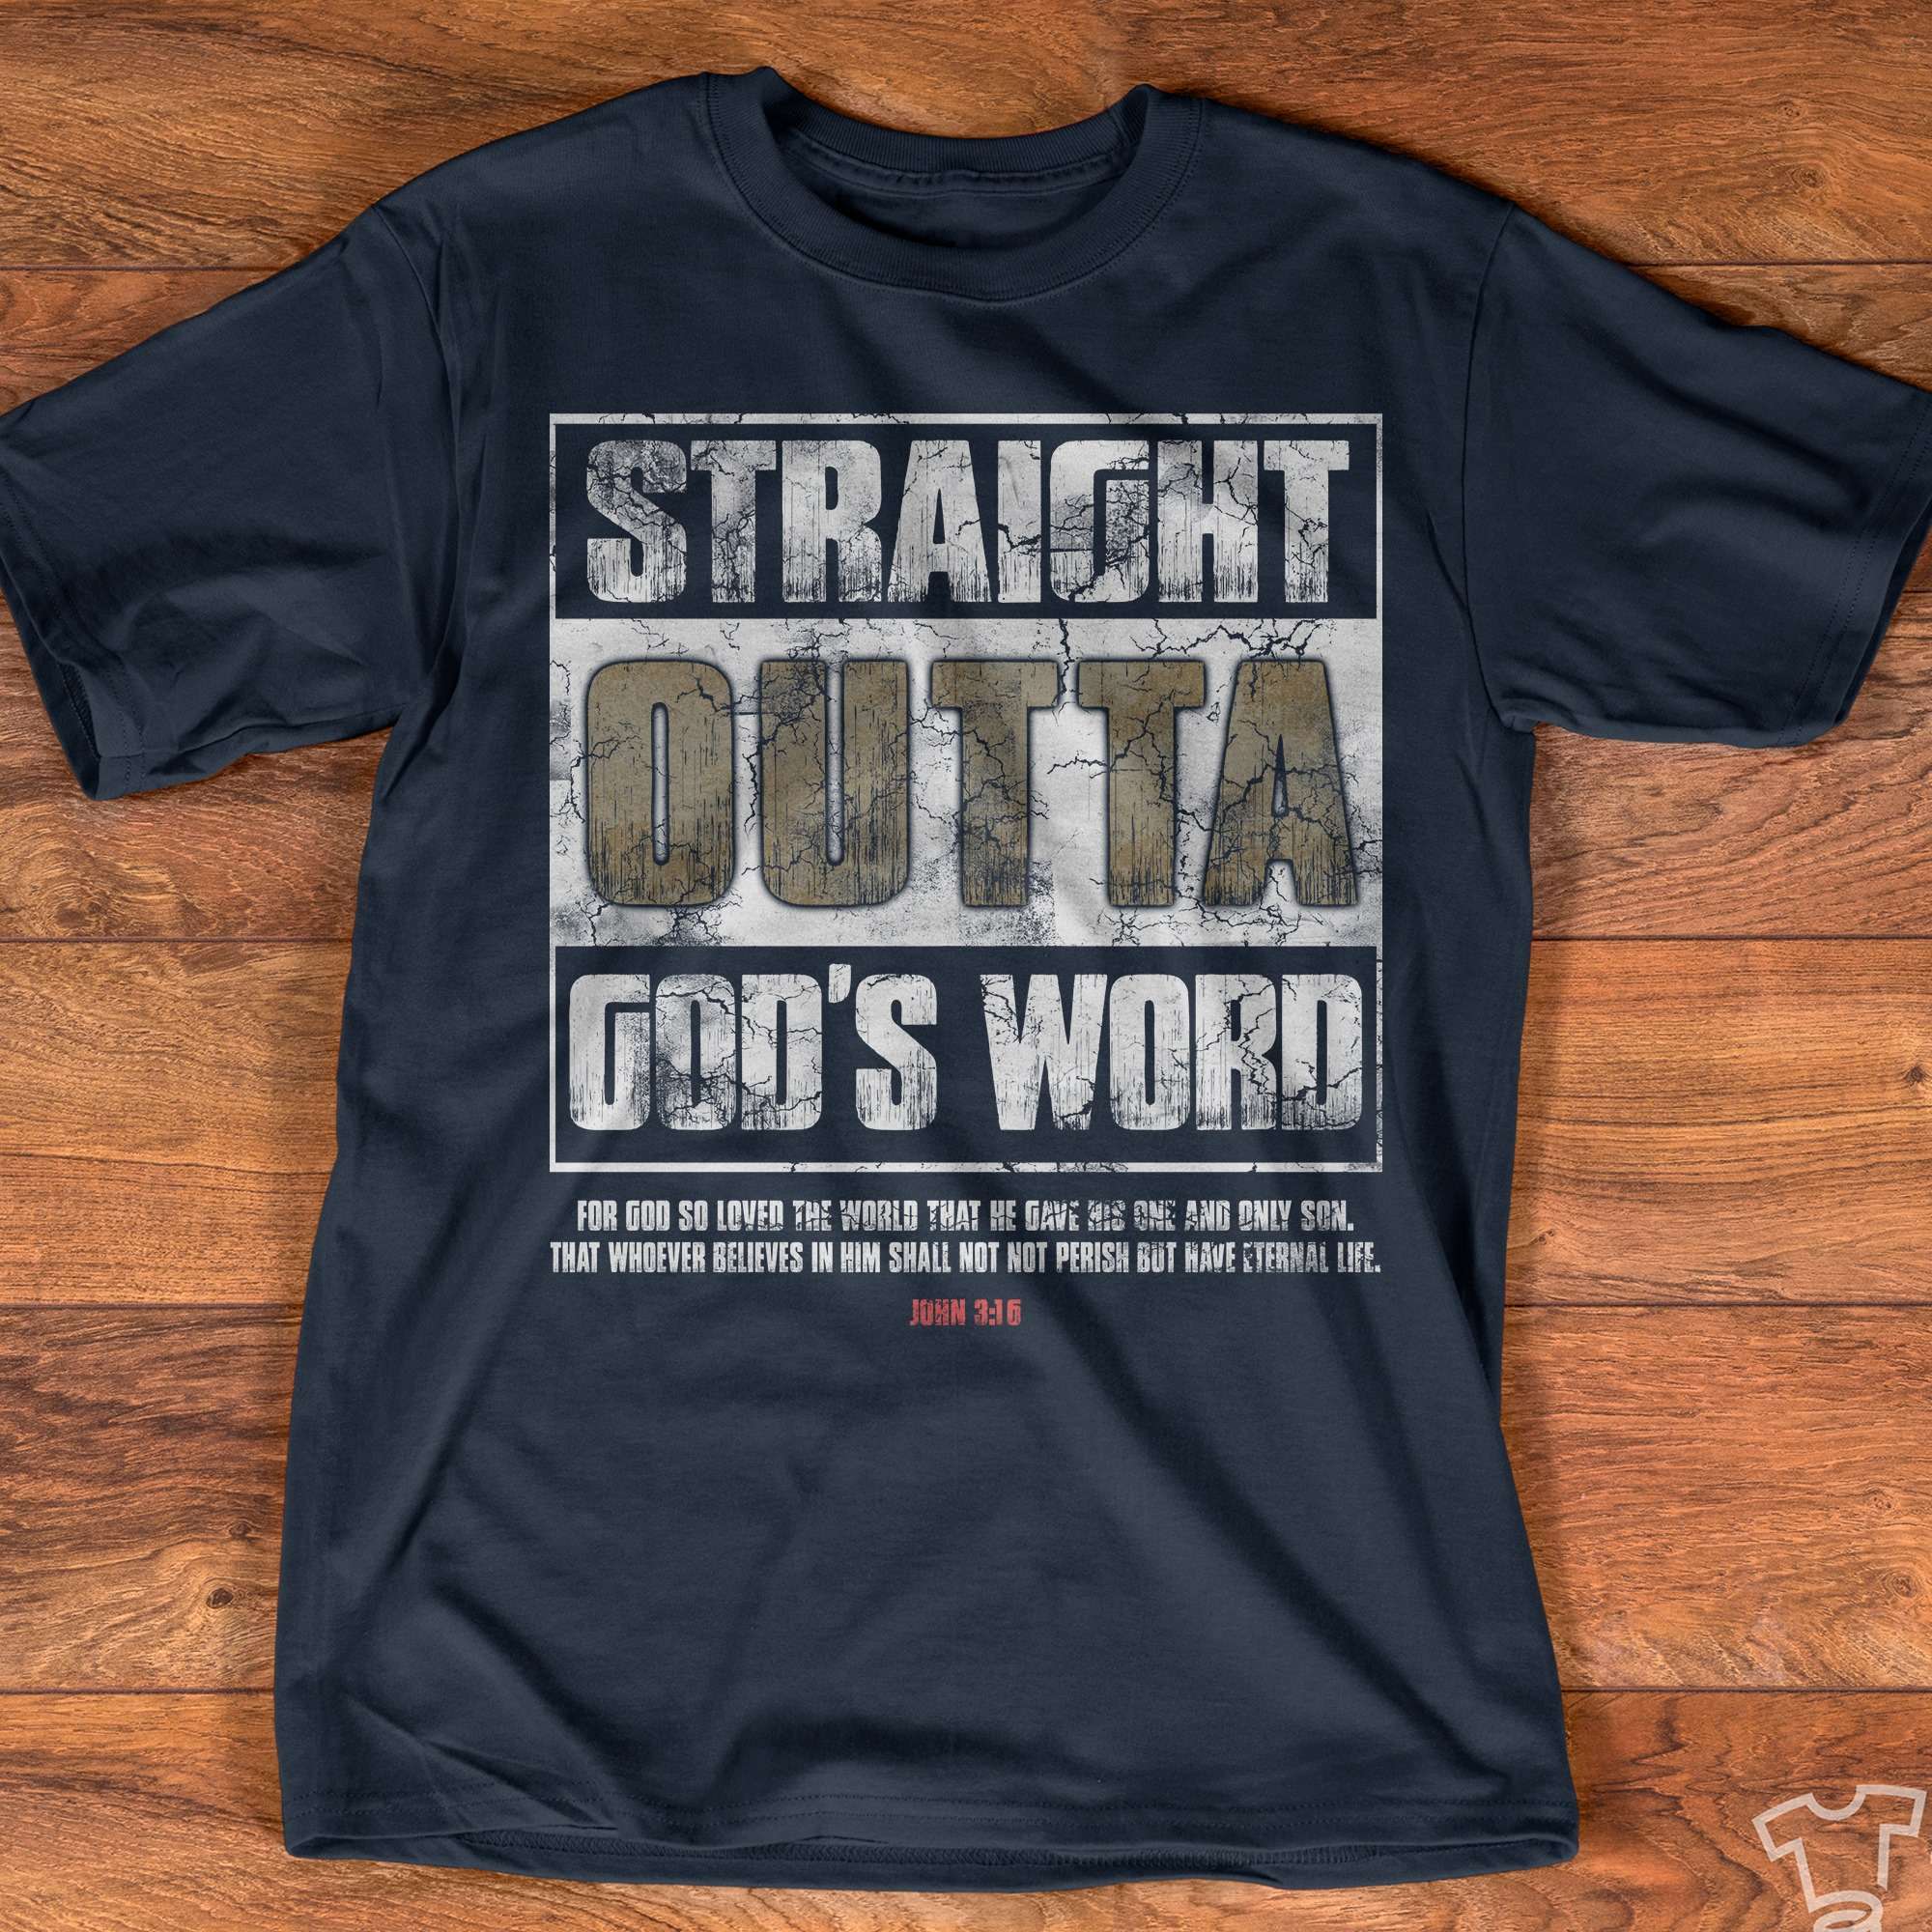 Straight outta god's word - Believe in God, Jesus the god